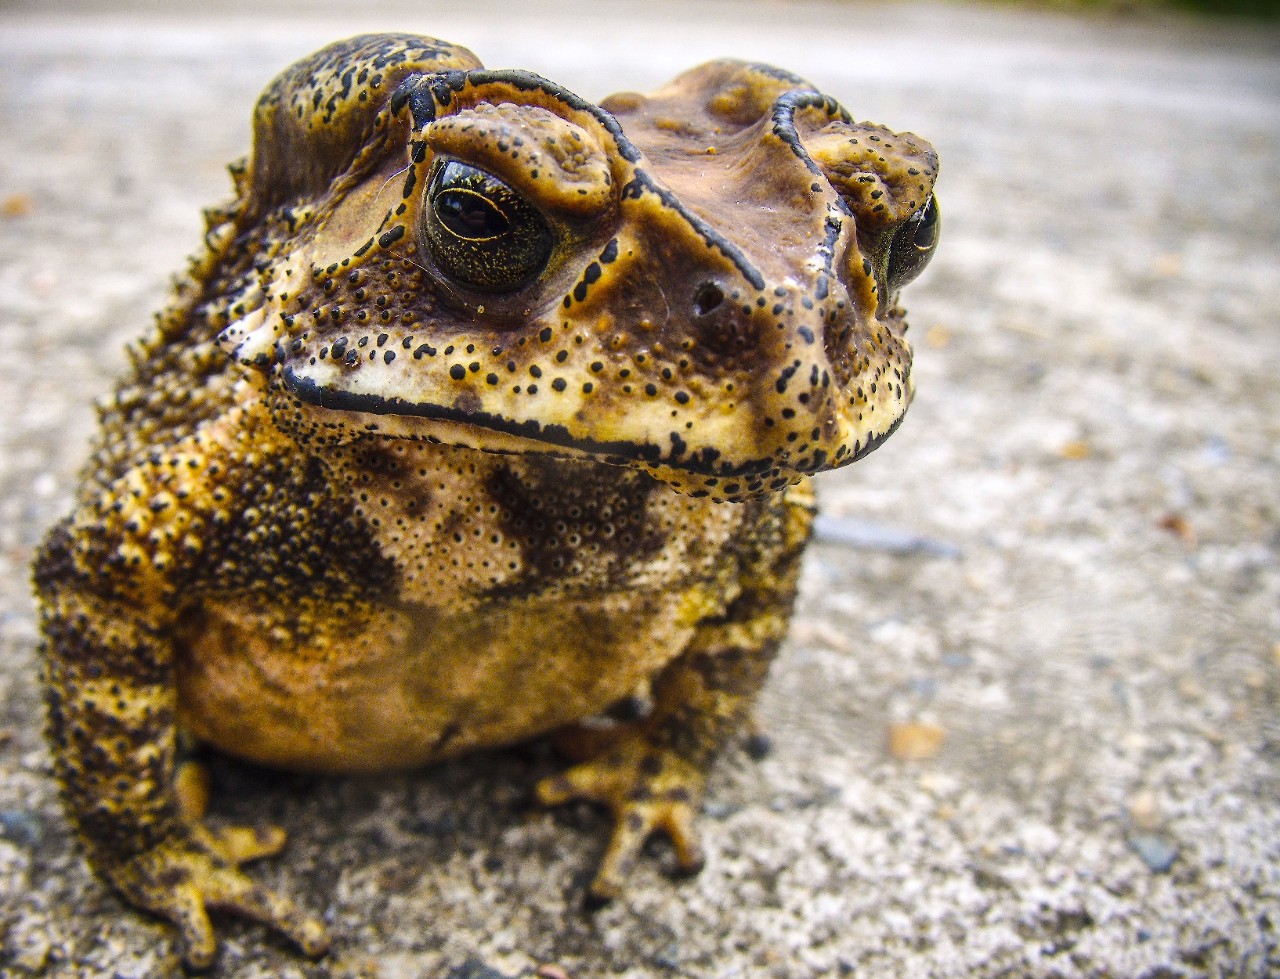 The cane toad was introduced to Australia in 1935.